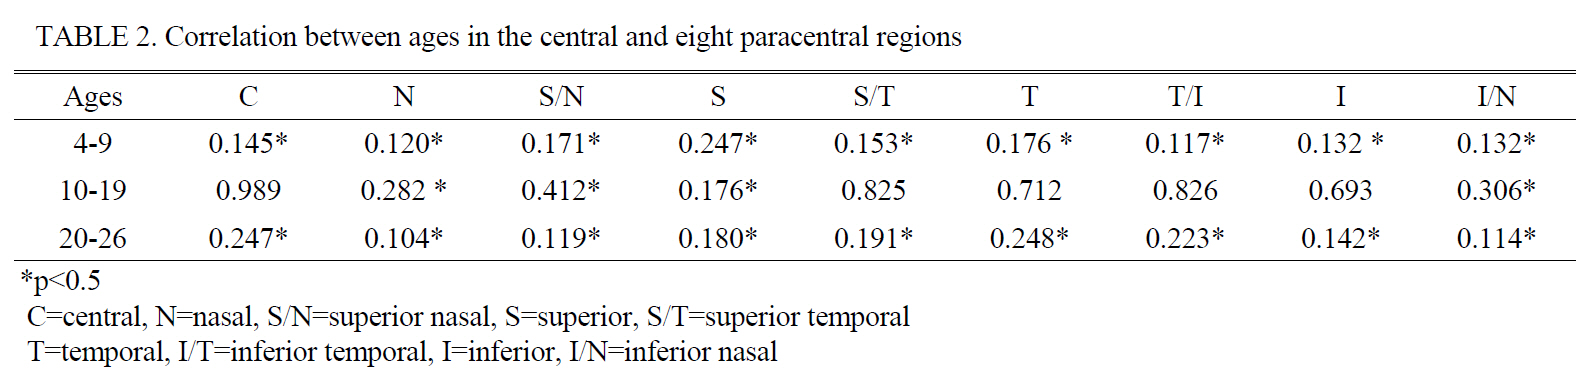 Correlation between ages in the central and eight paracentral regions